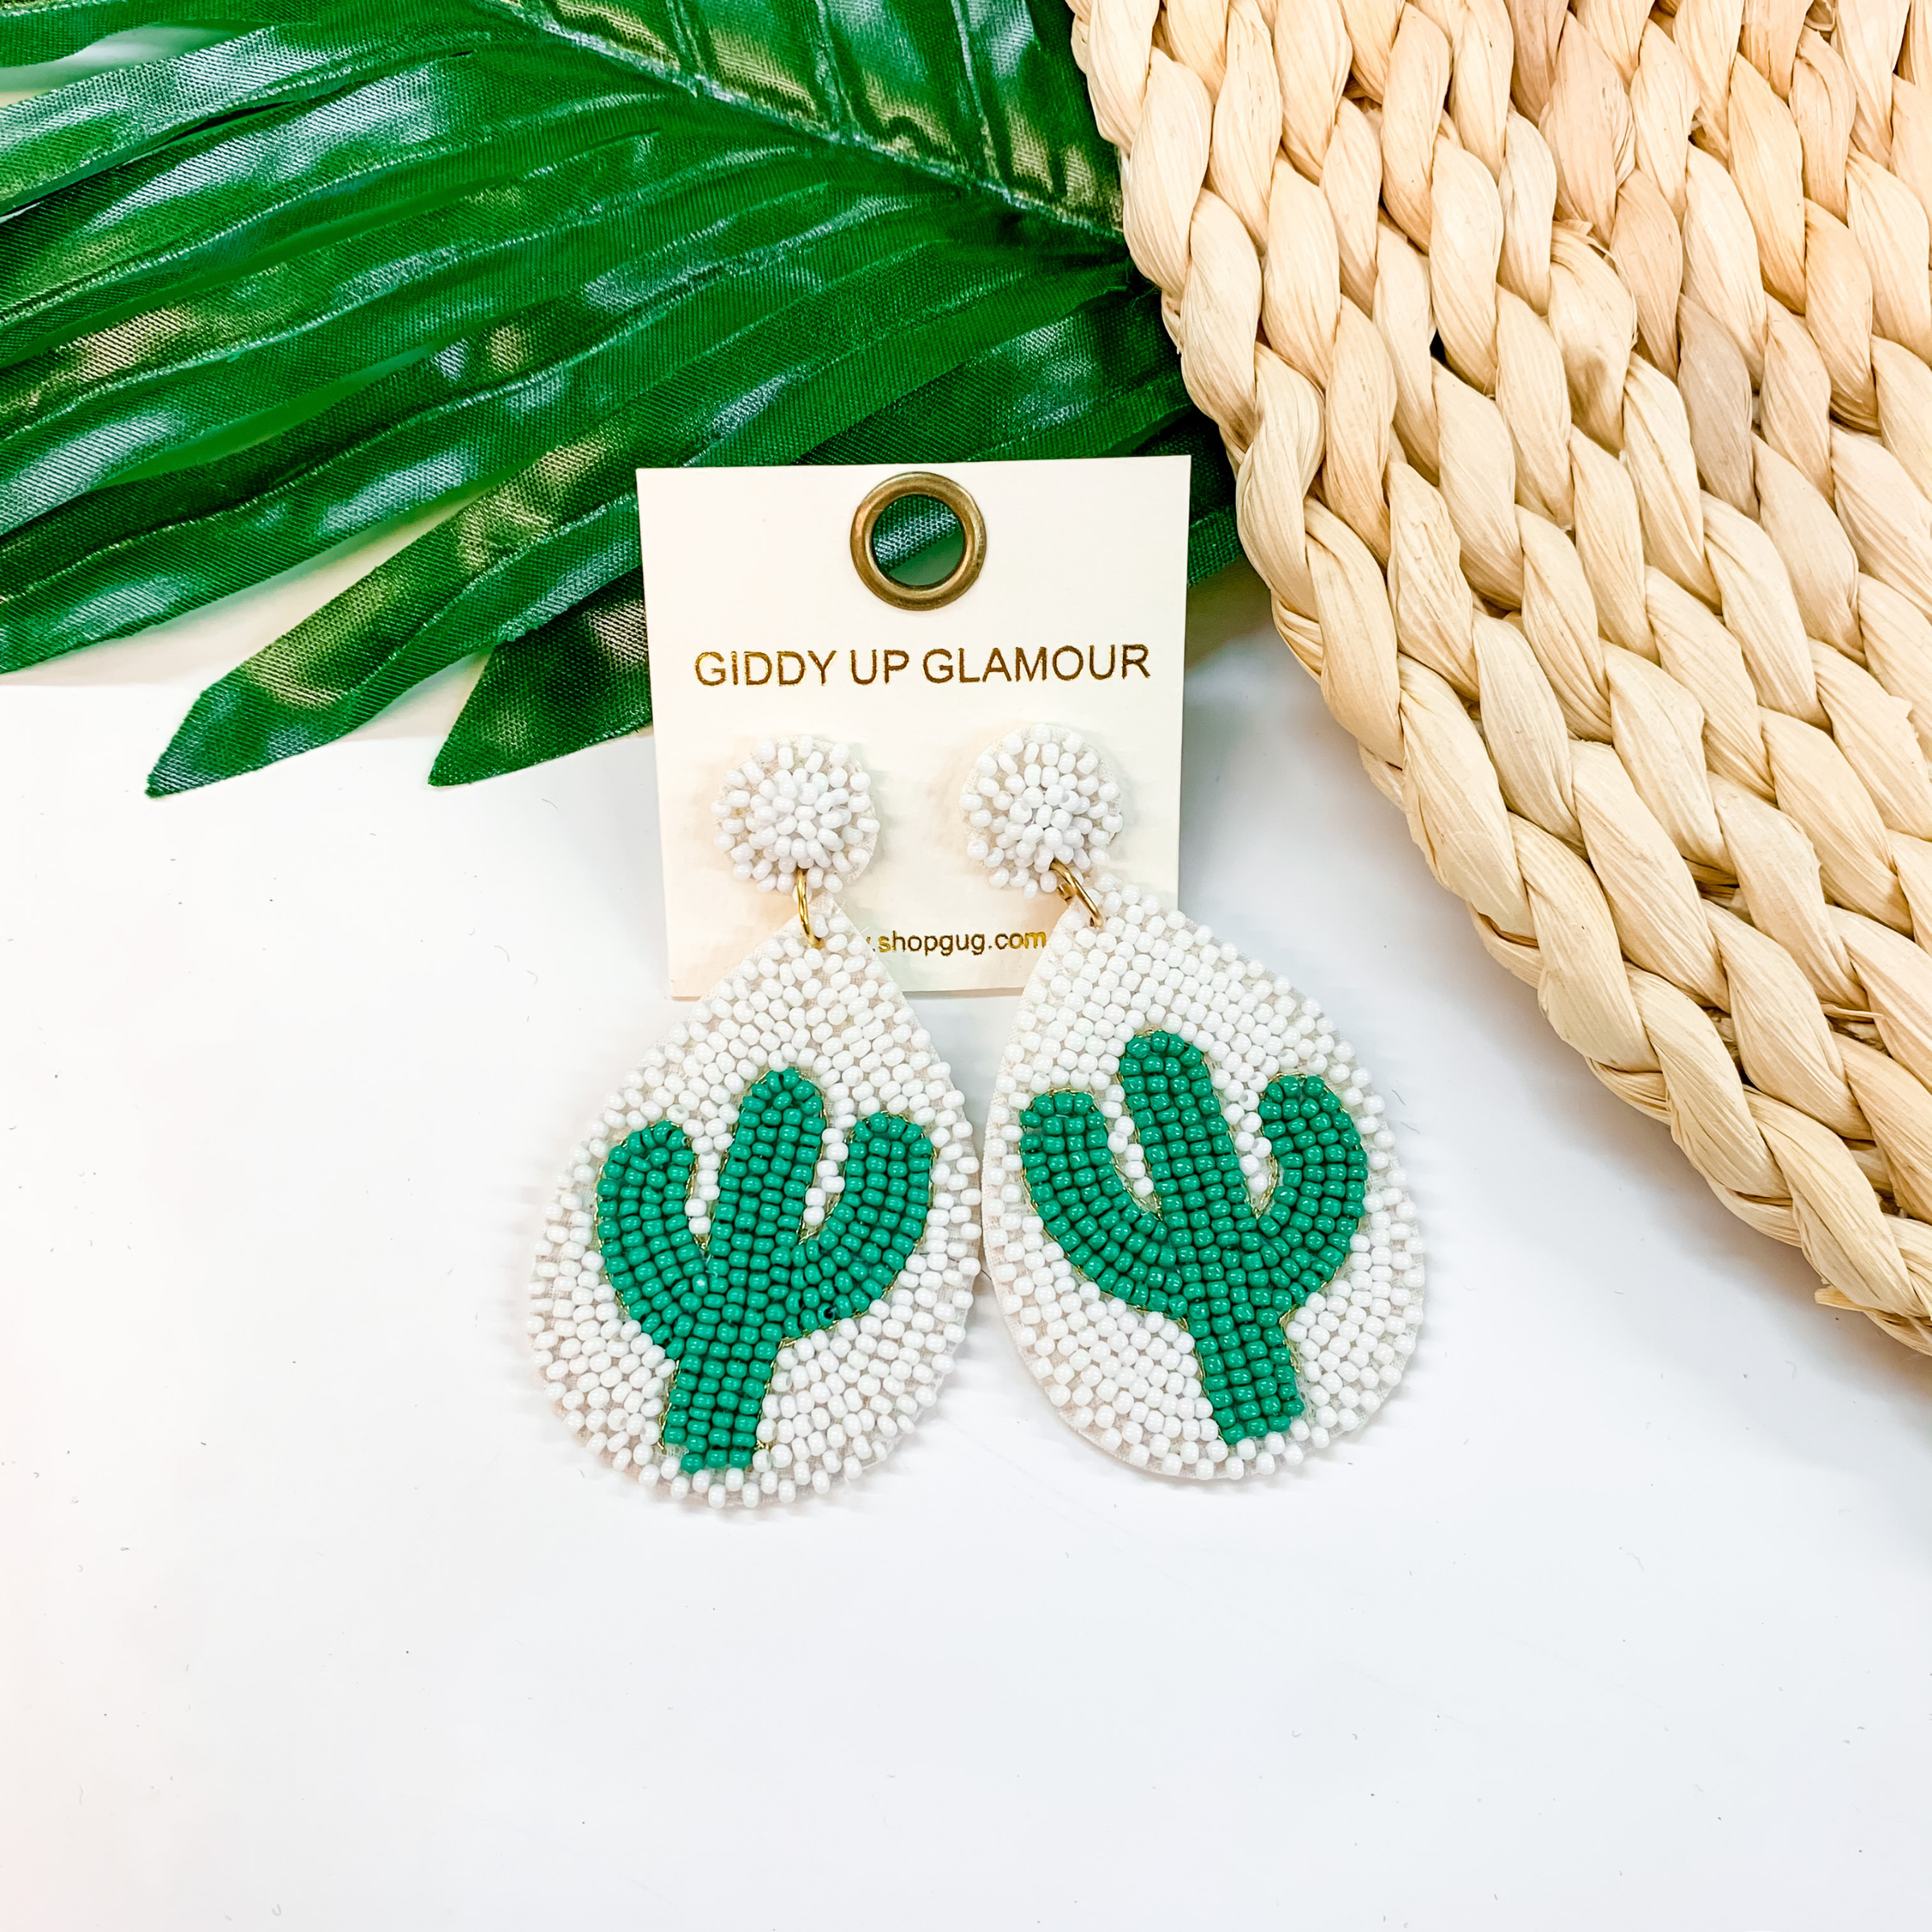 Lookin' Sharp Seed Bead Cactus Teardrop Earrings In White and Green - Giddy Up Glamour Boutique